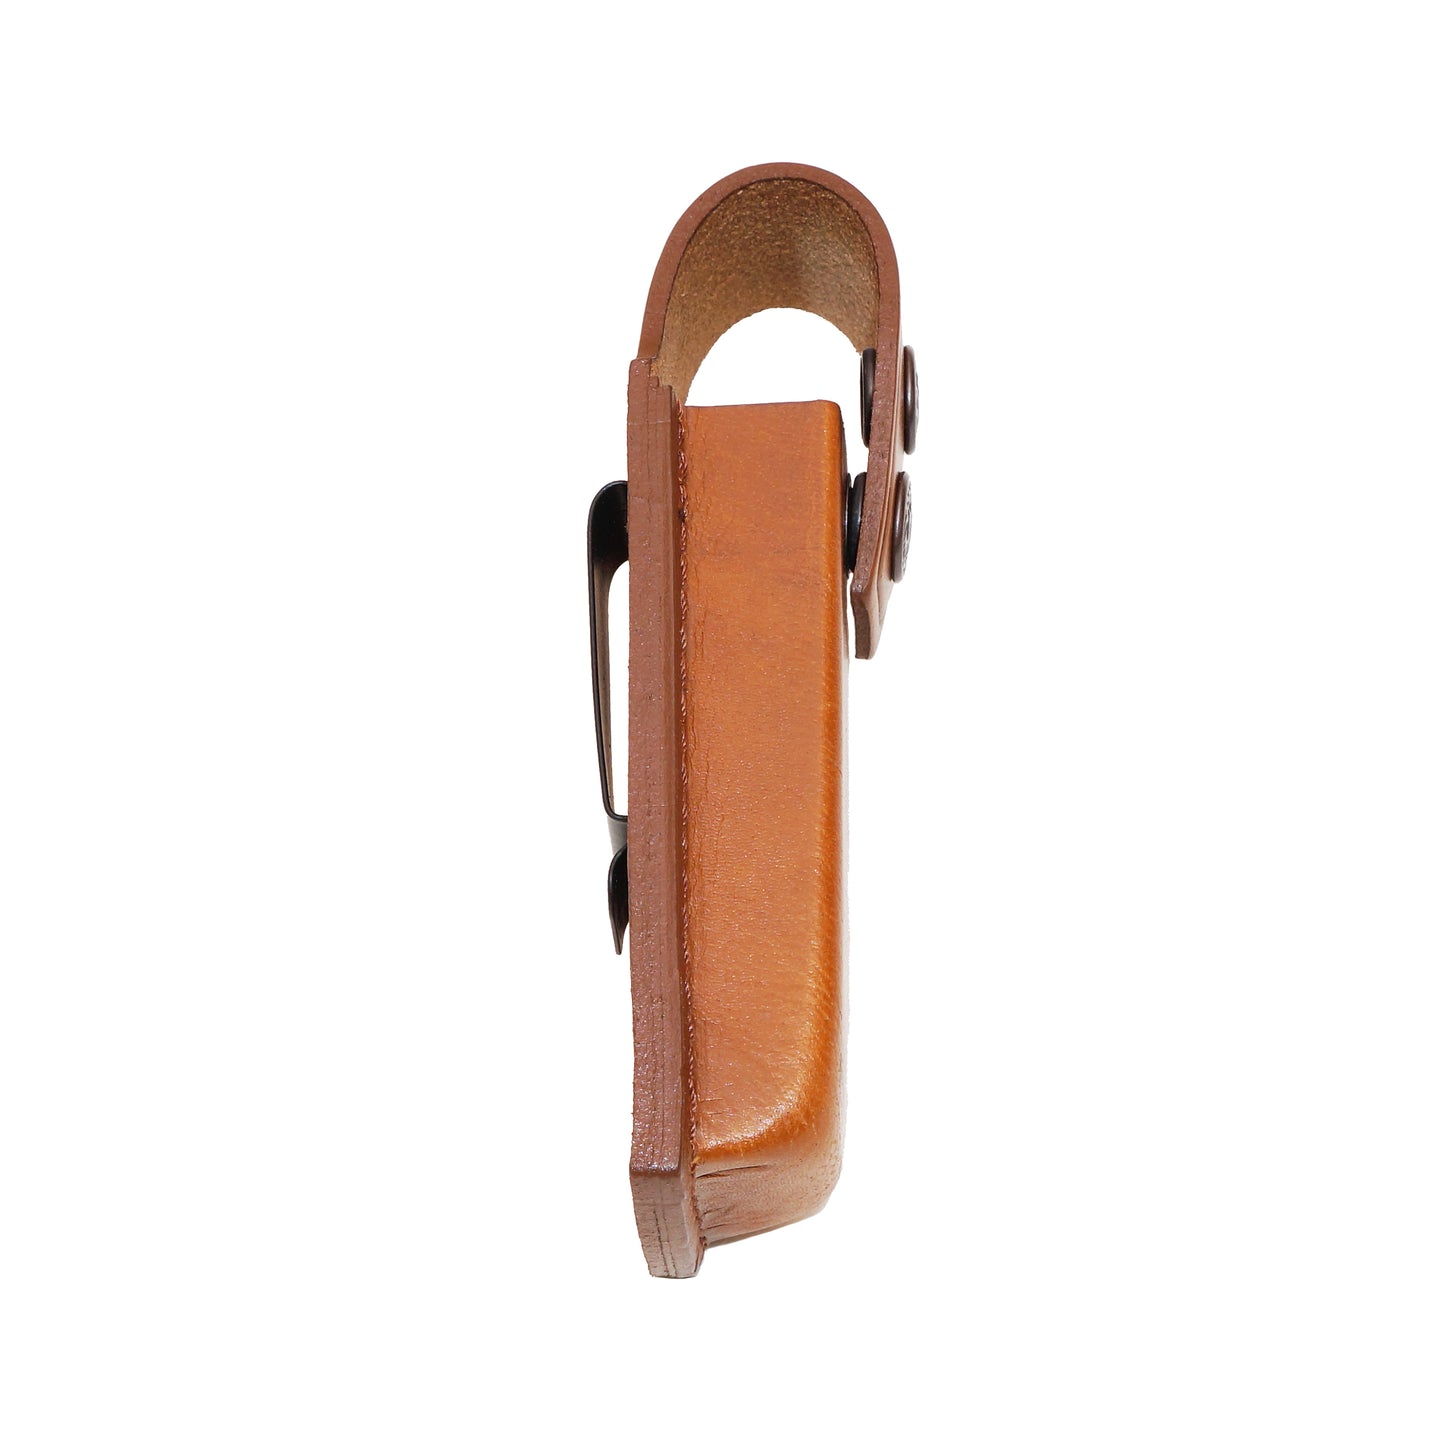 Holster KM091 Handmade Leather Single Magazine Pouch/Carrier/Case with Belt Clip for Glock 17 19 22 23